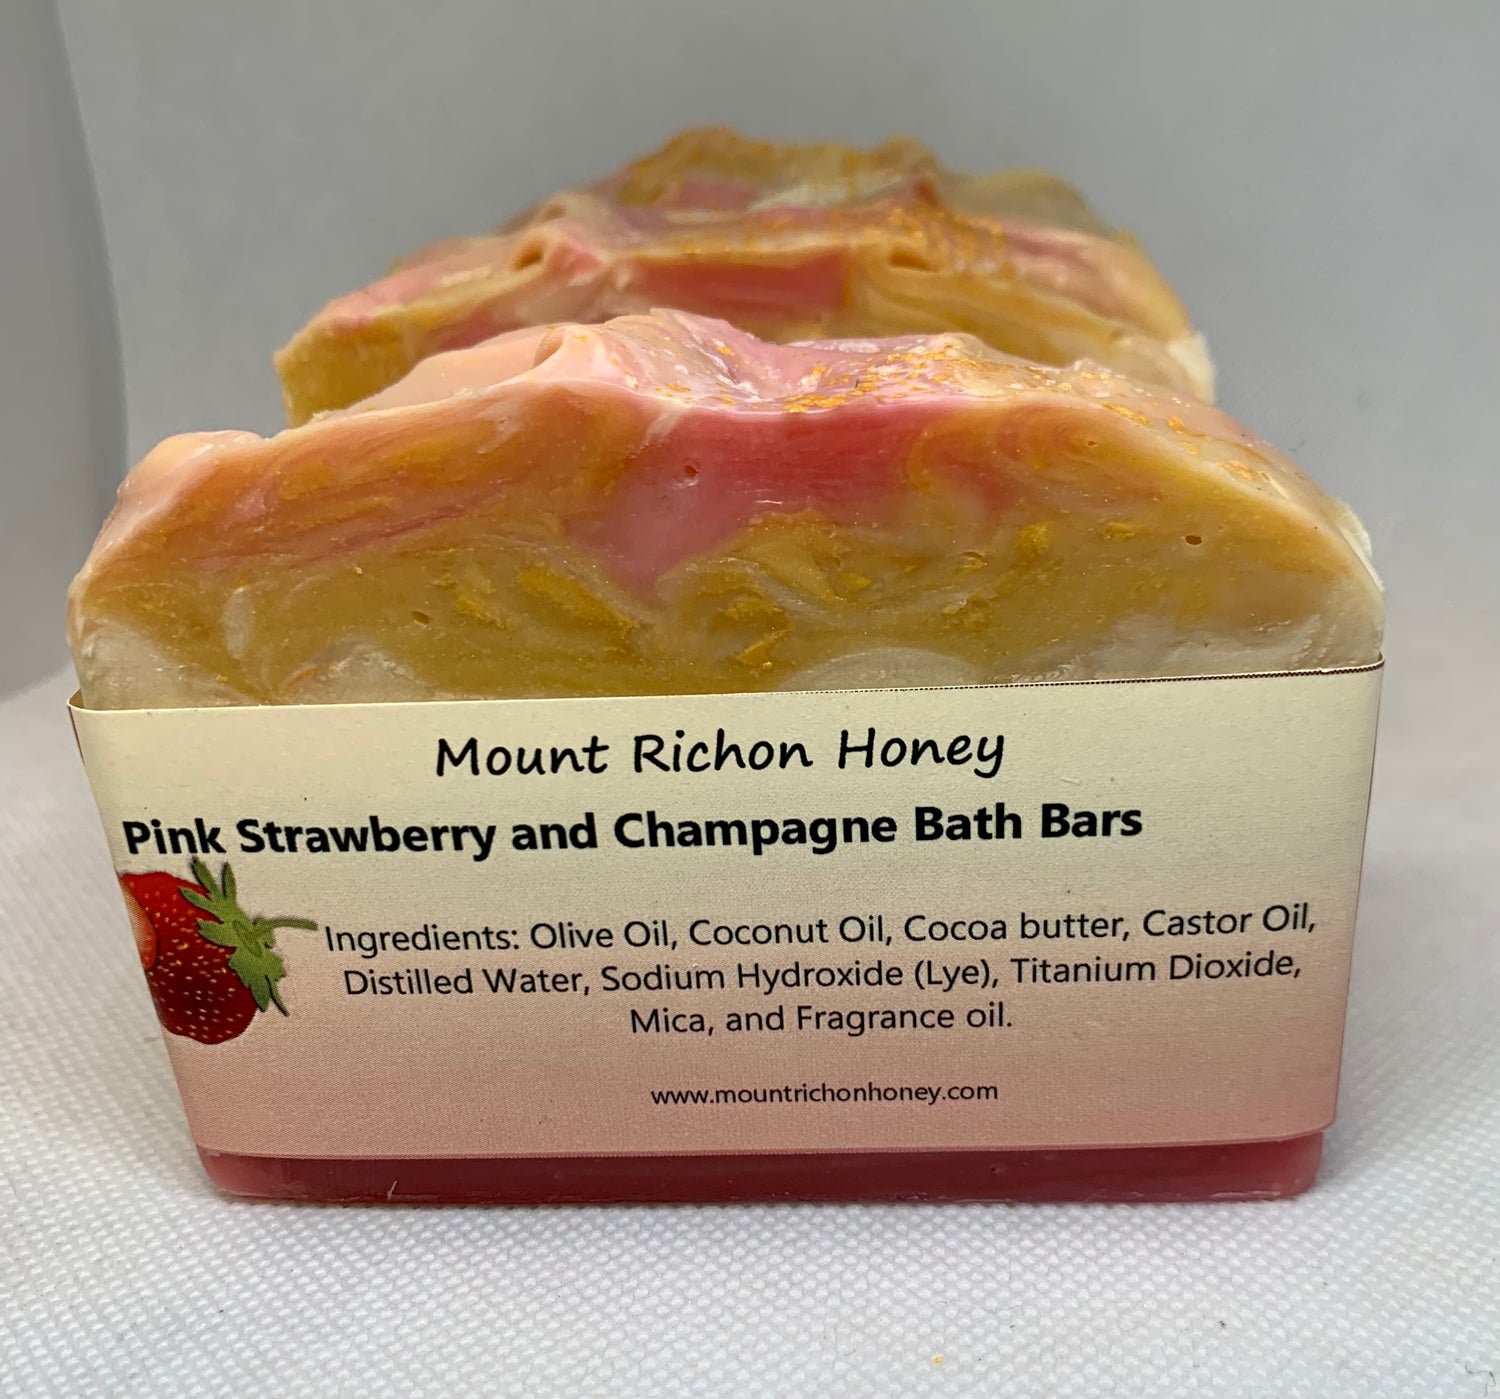 Pink Strawberry and Champagne Bath Bars